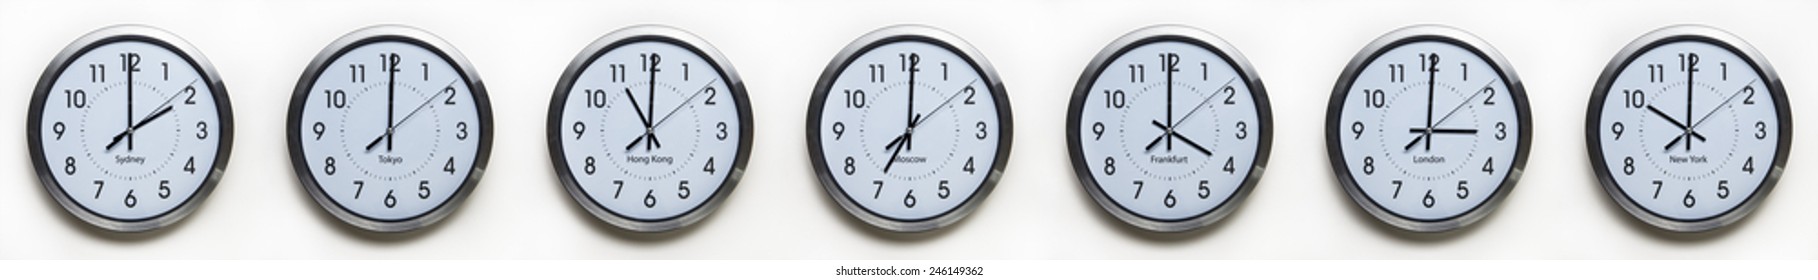 clock on the wall of time zones for trading around the world set at 3PM london GMT time